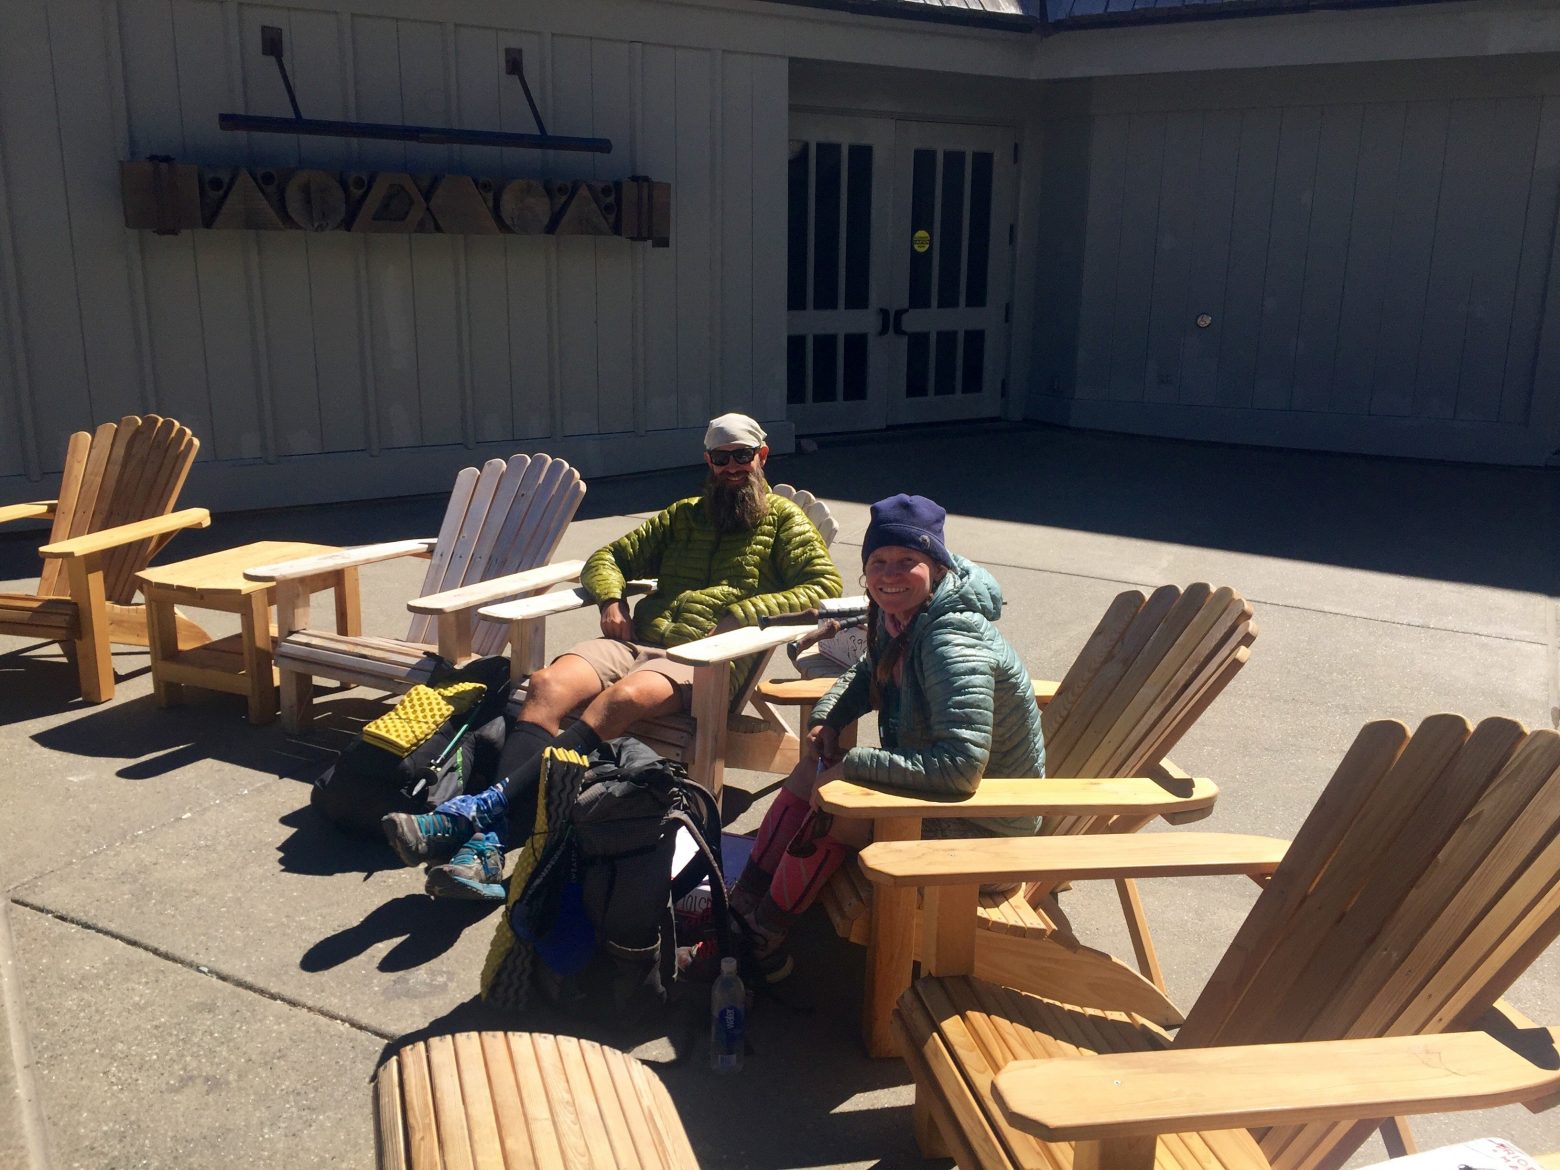 Beardoh and Sweet Pea lounging on the patio of Timberline Lodge